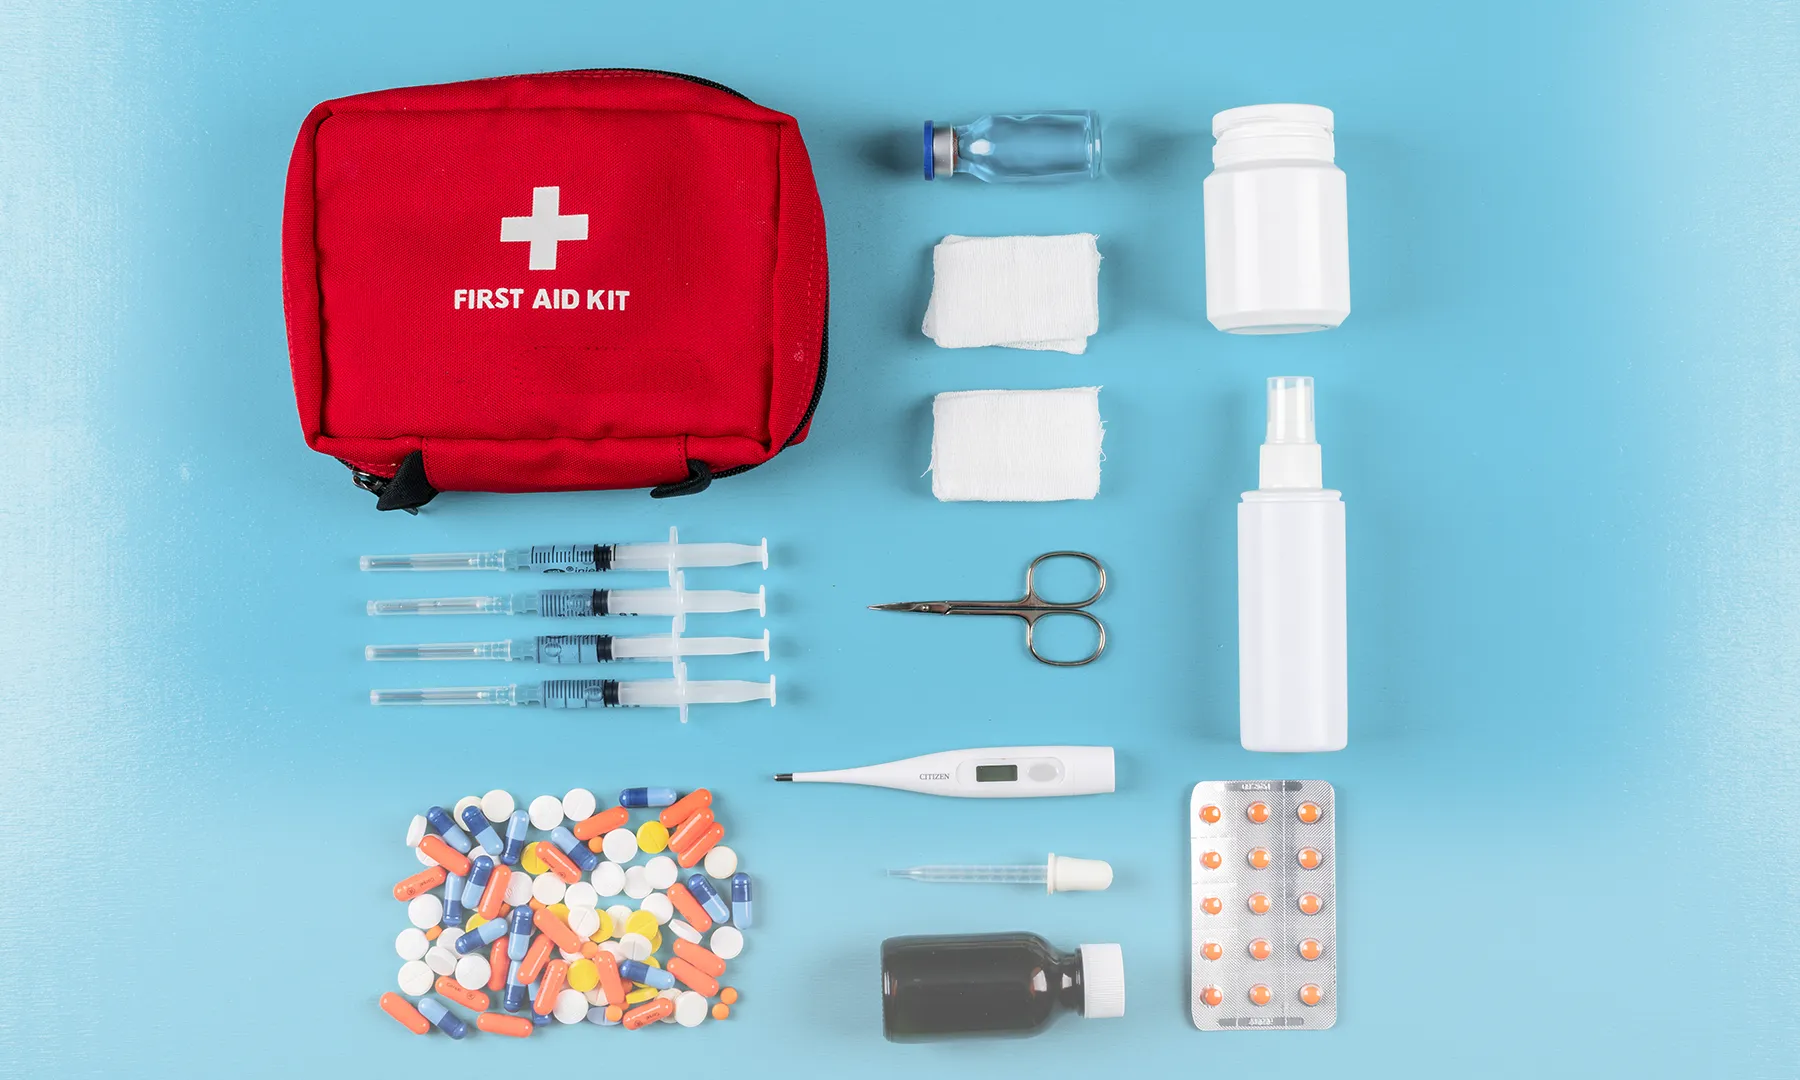 First Aid Kit Contents at Home for Emergencies